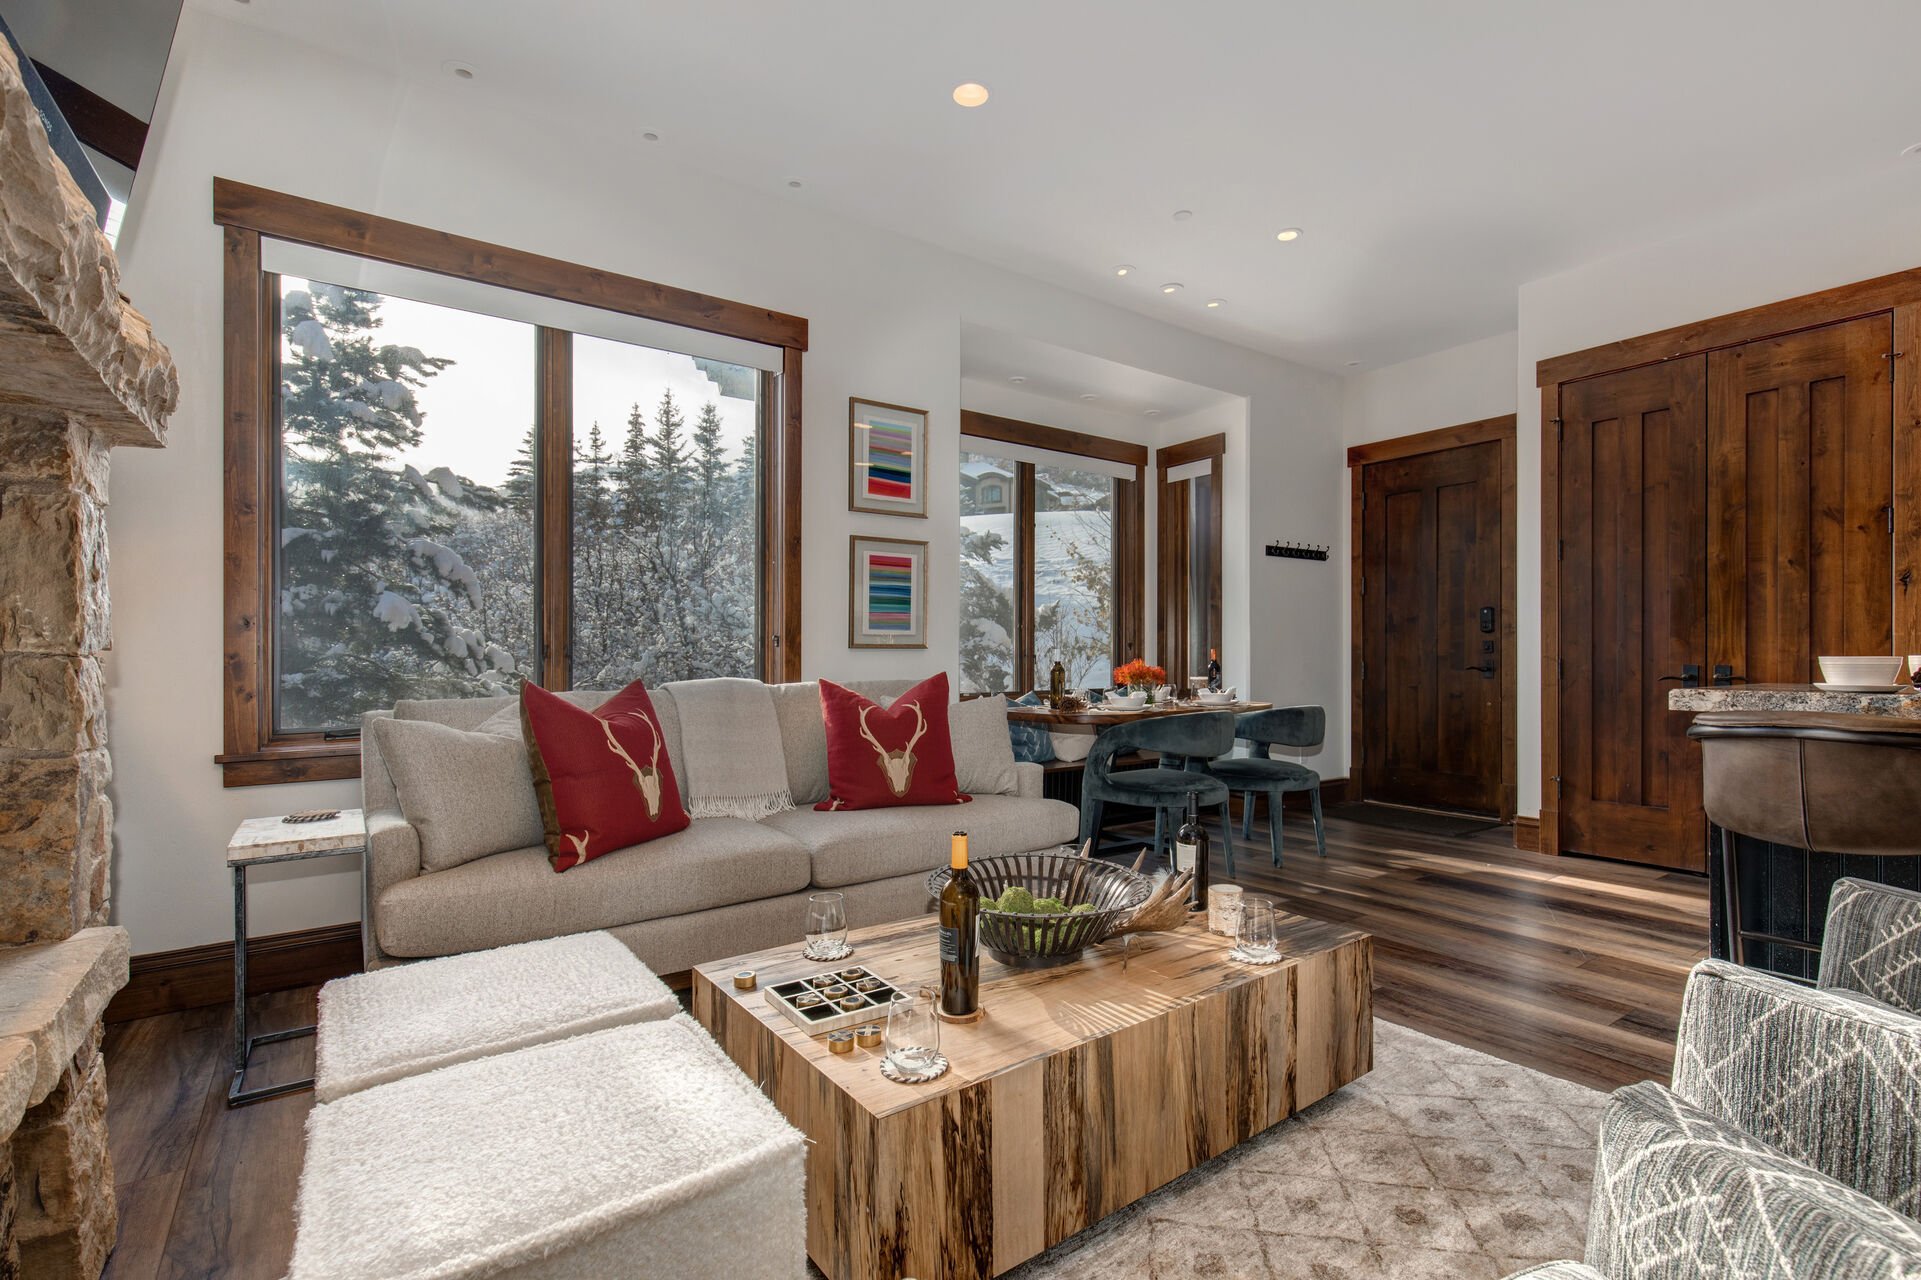 Mountain contemporary furnishings, a 65” Smart TV with cable programming and Sonos Soundbar, a cozy gas fireplace and a plethora a of natural light